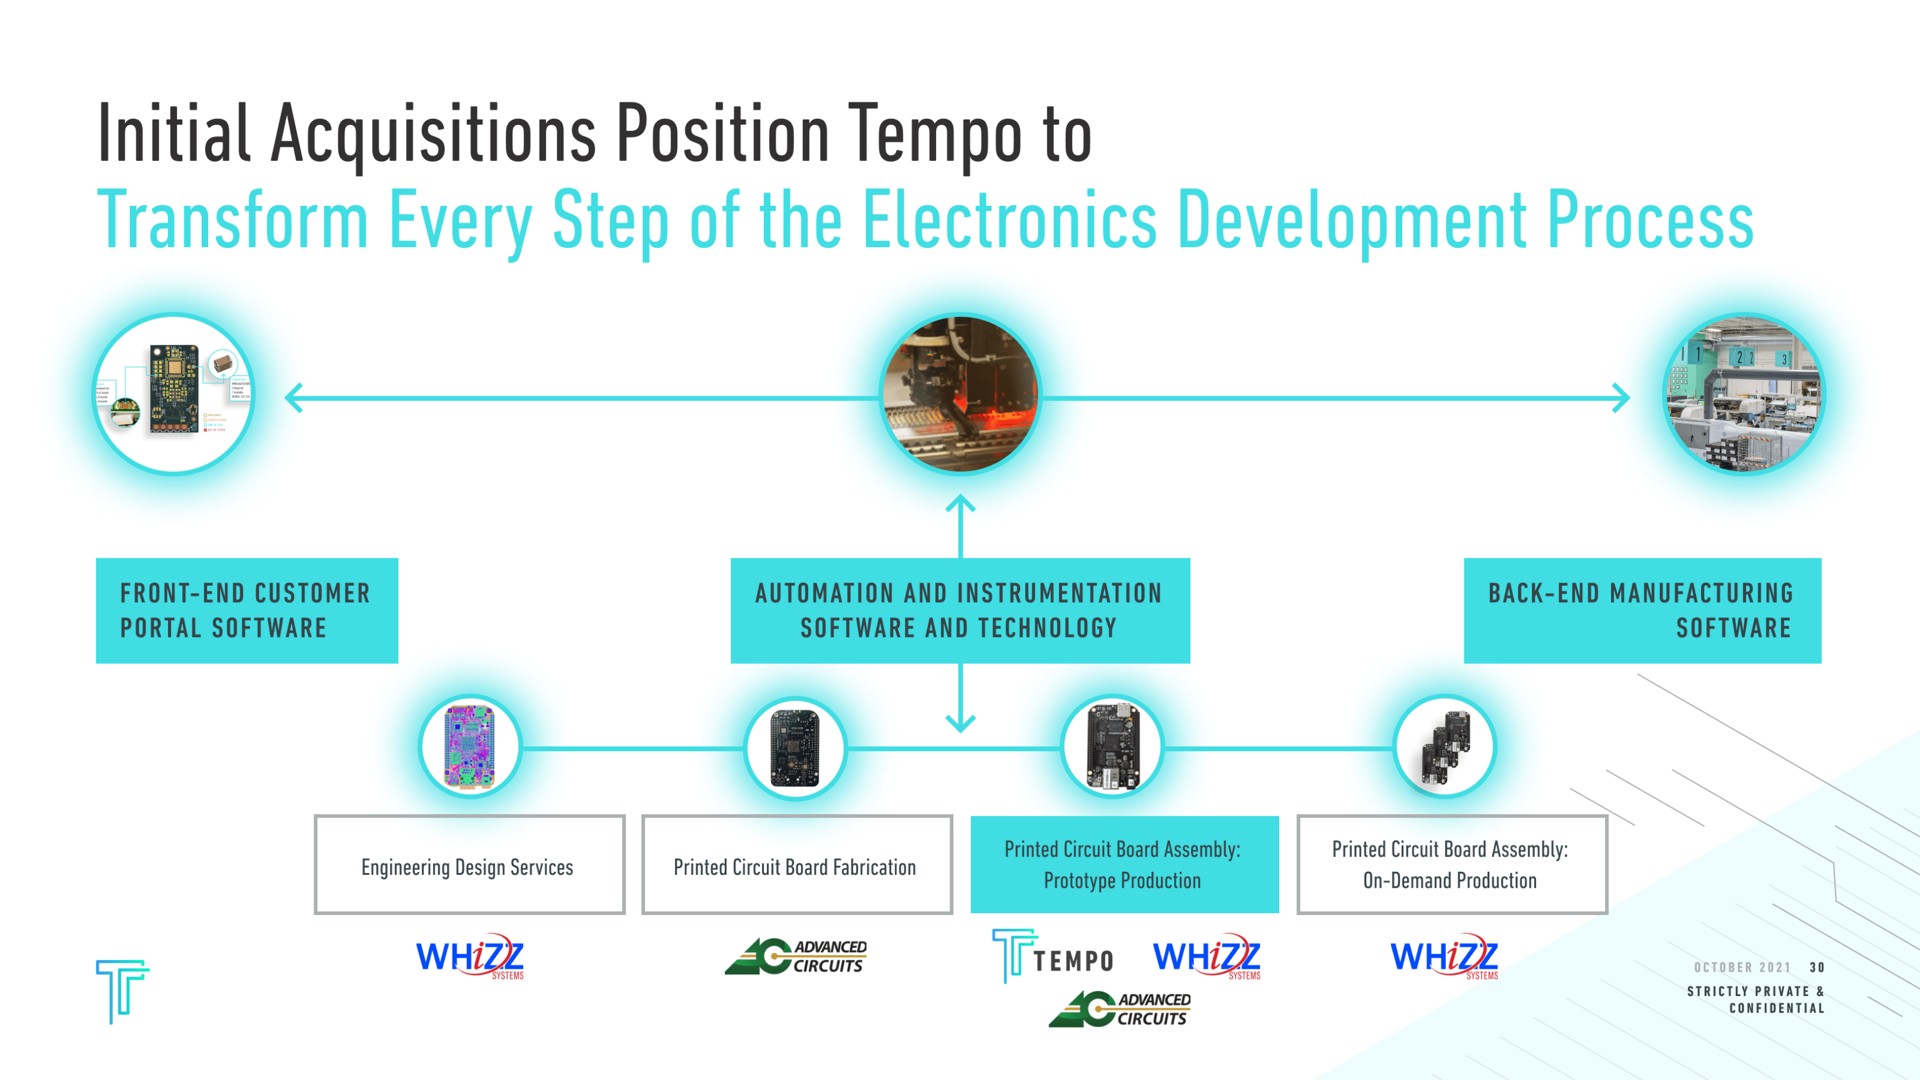 initial acquisitions position tempo to transform every step of the electronics development process | Tempo